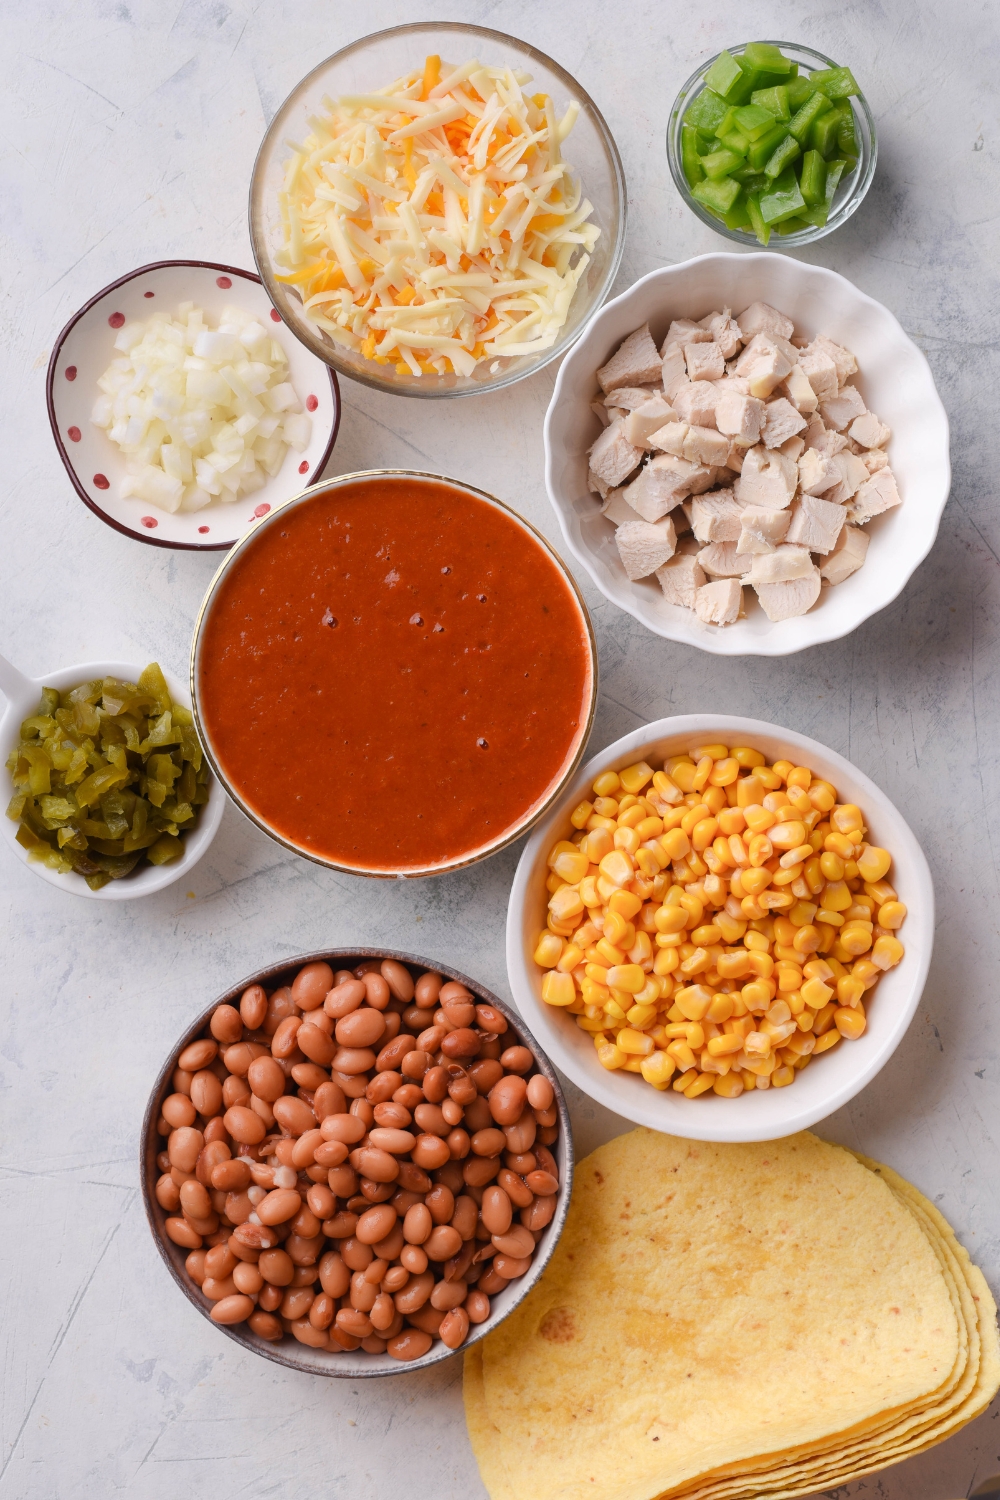 An assortment of ingredients including bowls of enchilada sauce, diced chicken, pinto beans, corn, shredded cheese, diced green peppers, diced onion, green chiles, and a stack of tortillas all on a white counter.